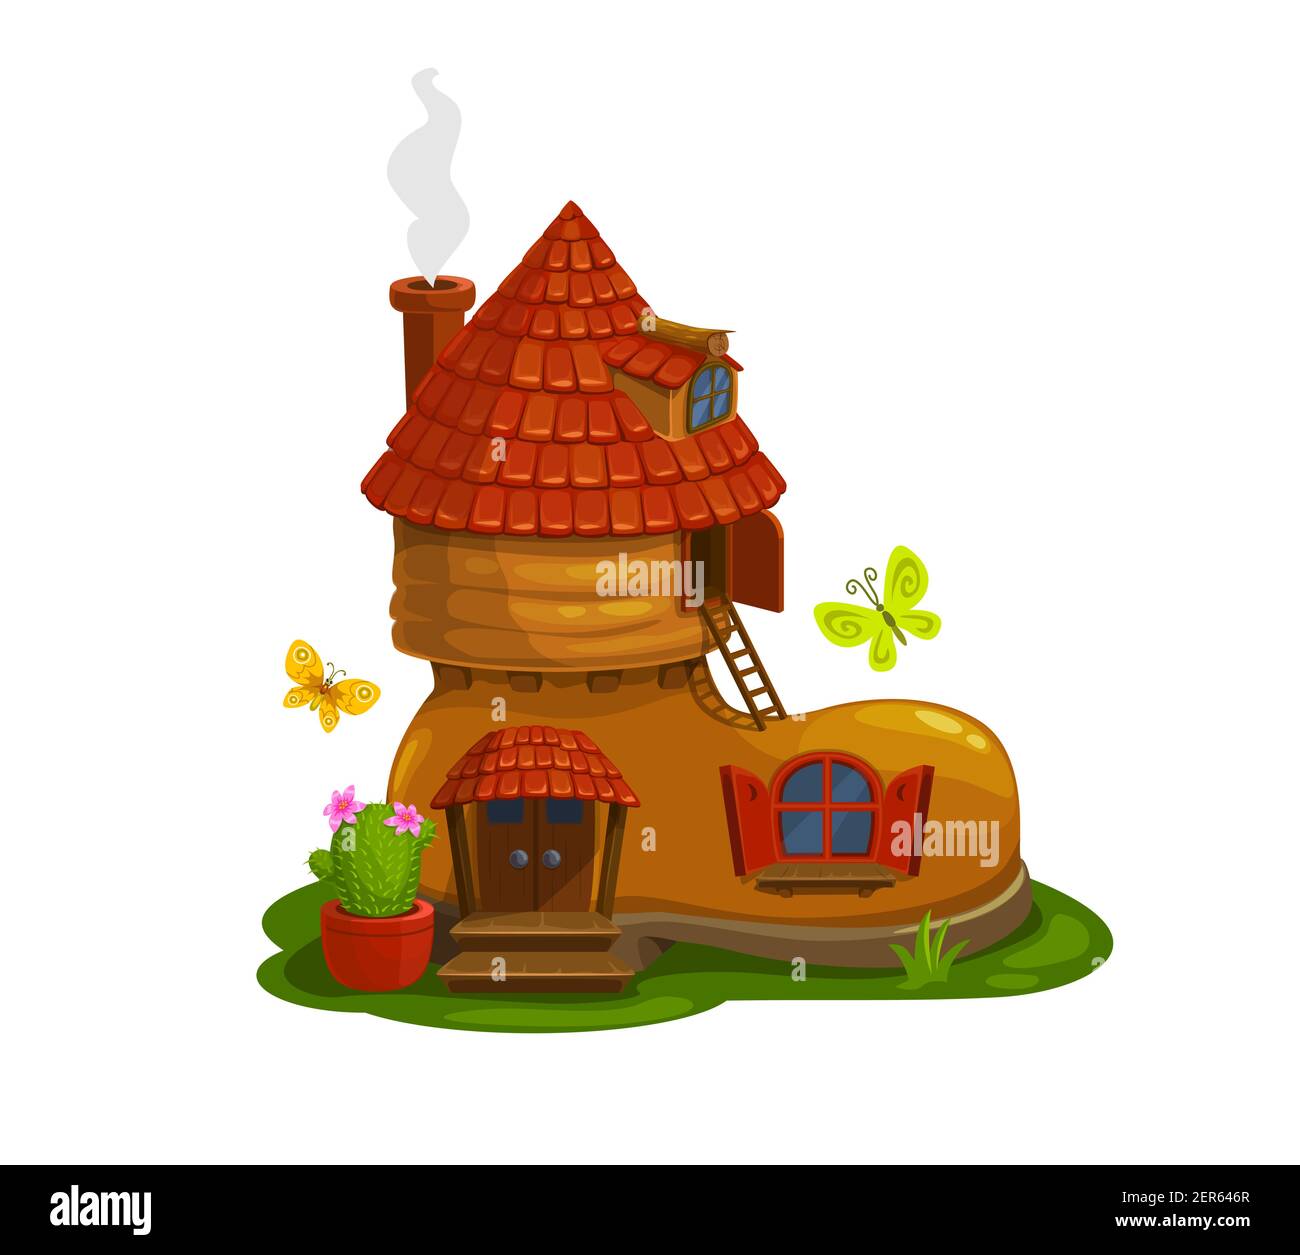 Gnome, dwarf or pixie fairytale house in shape of boot cartoon vector. Magical creature home in shoe with smoking chimney on tiled roof, cactus in flo Stock Vector